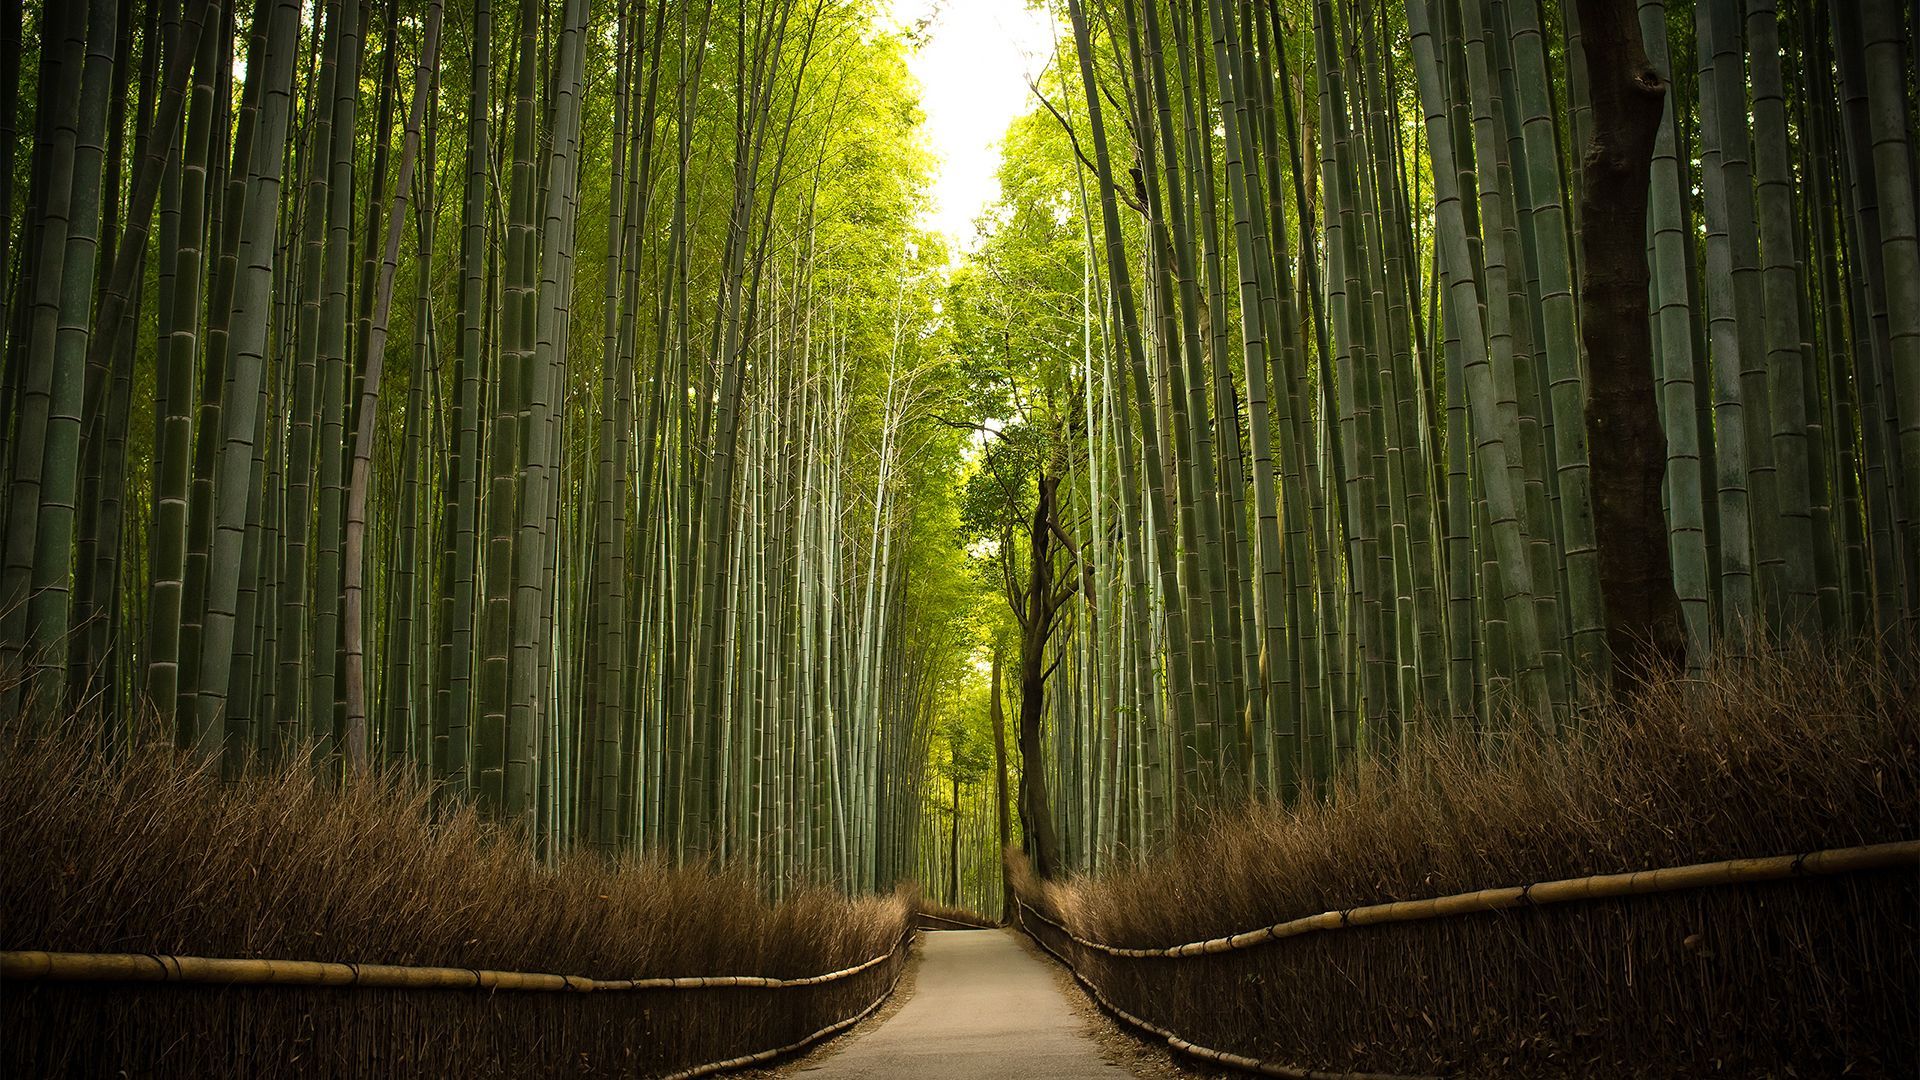 Bamboo Forest HD Wallpaper | 1920x1080 | ID:26750